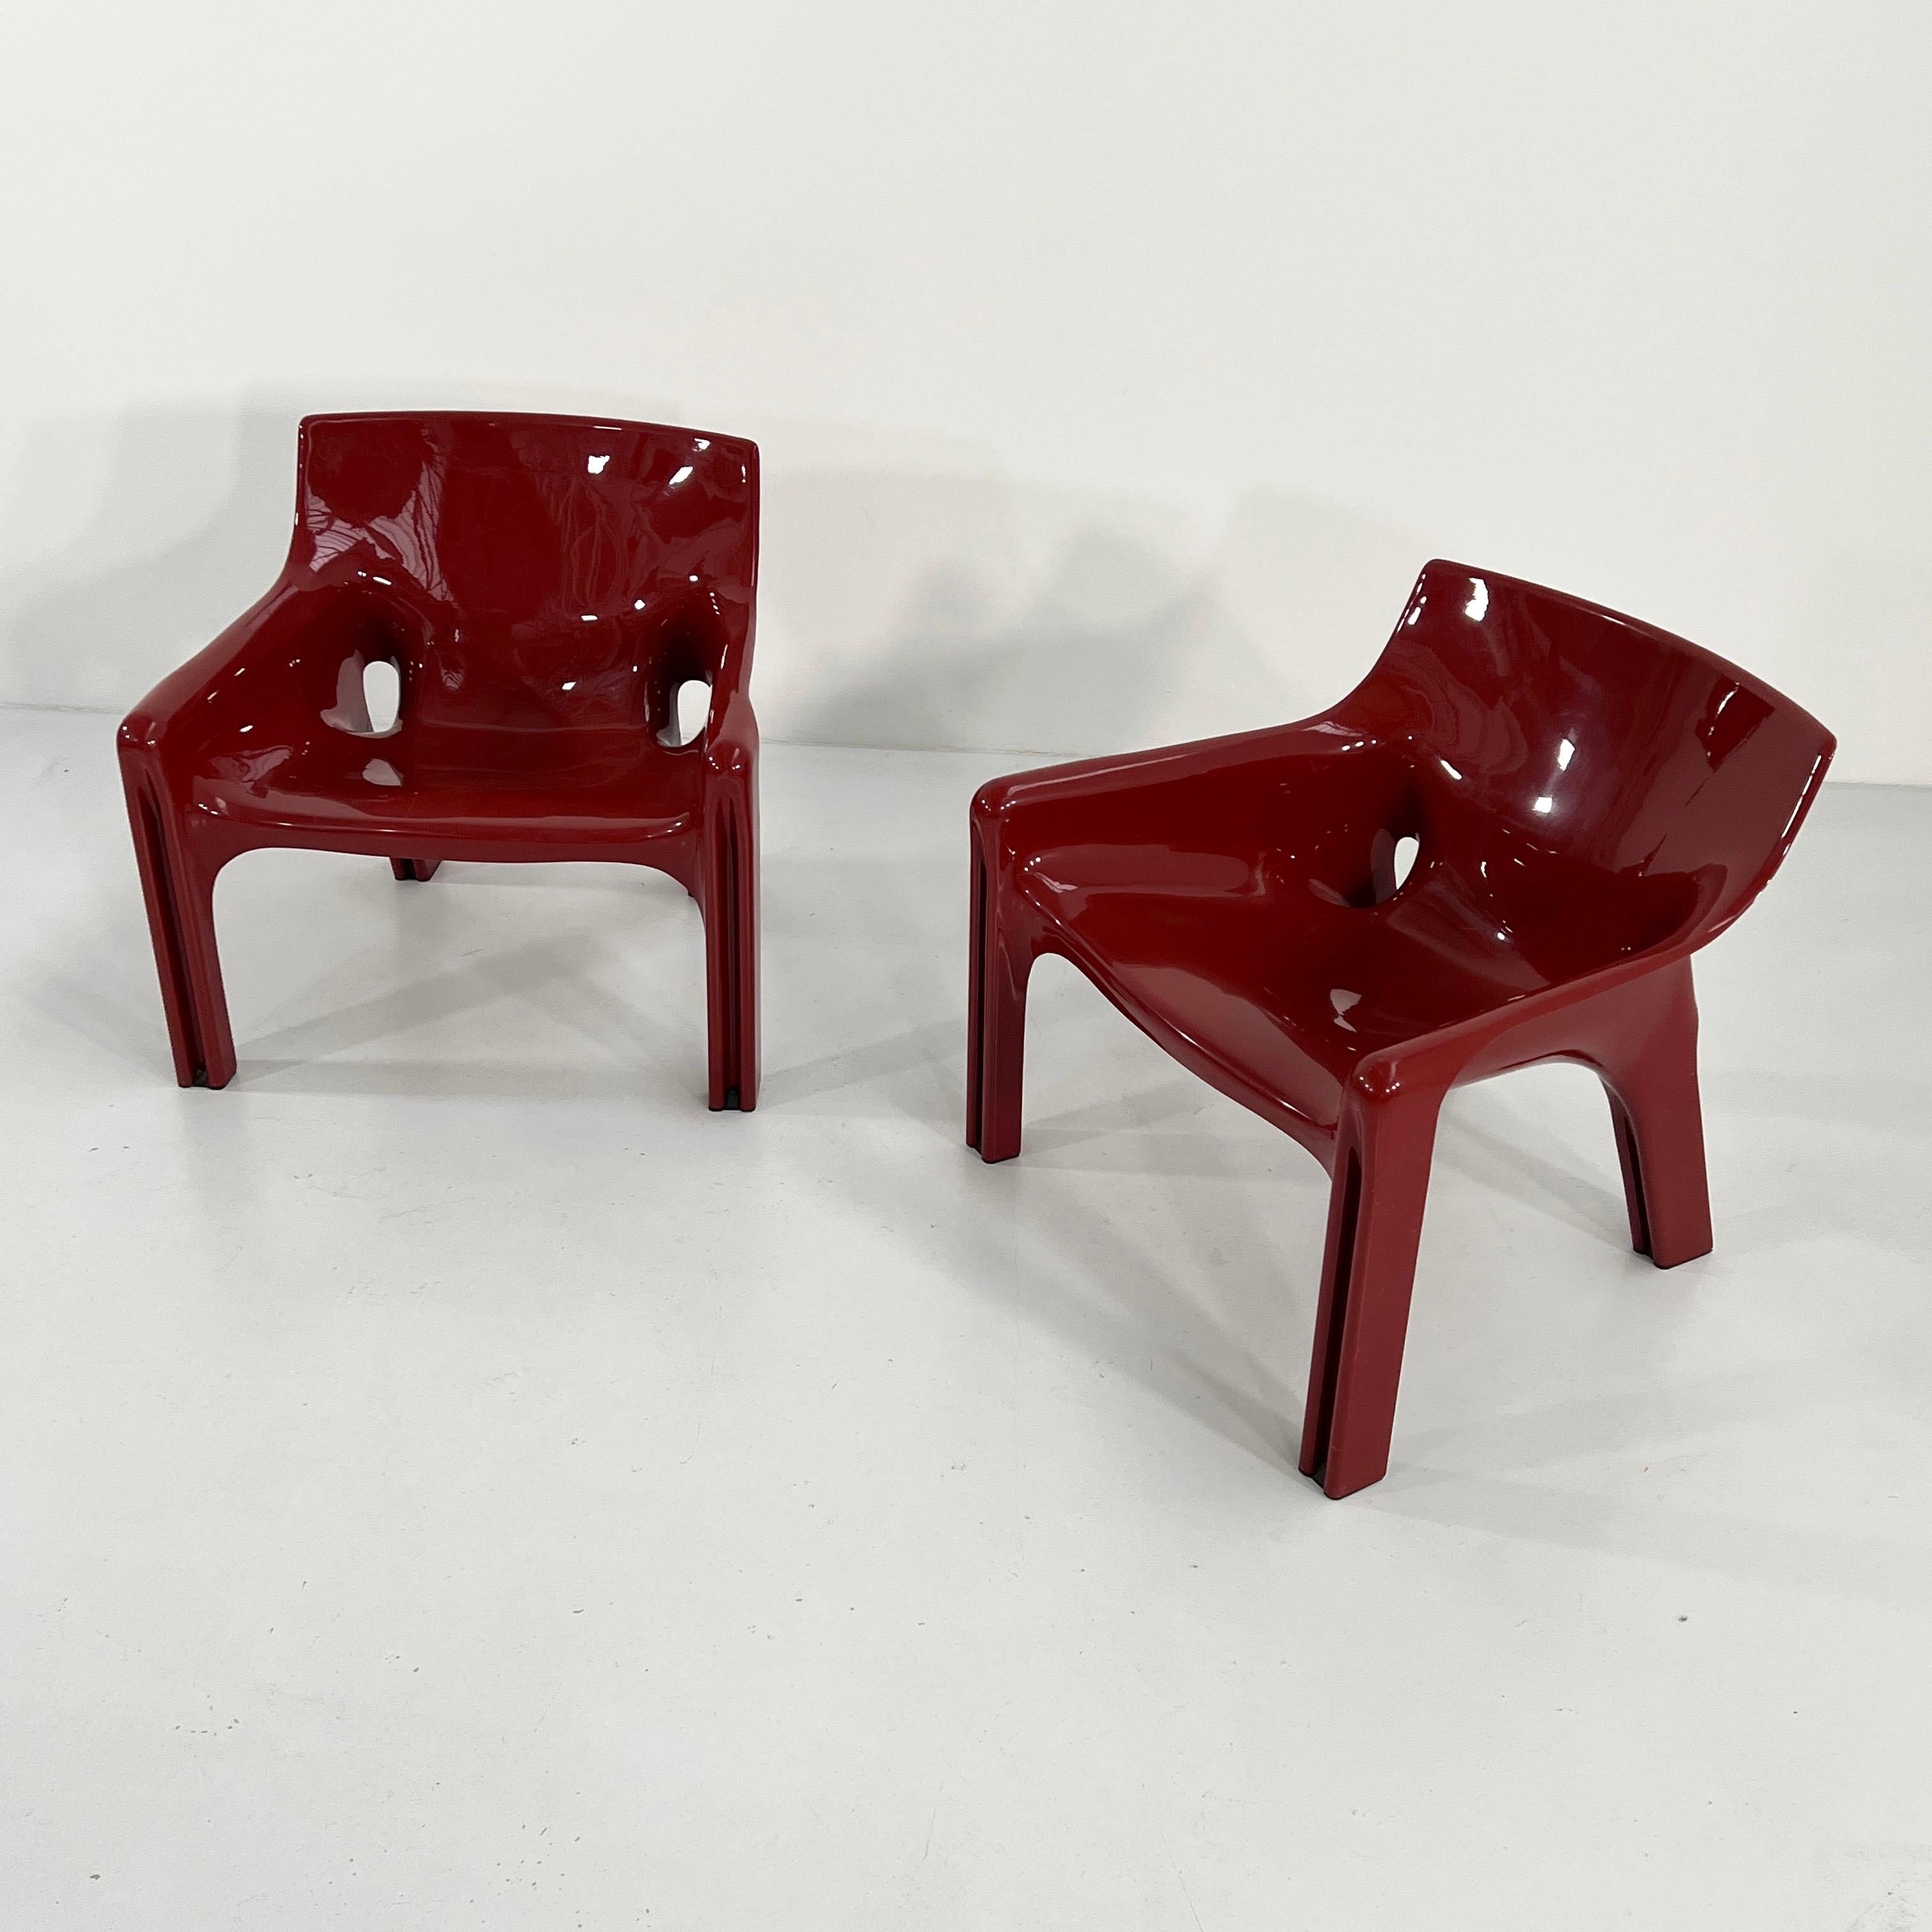 Plastic Pair of Burgundy Vicario Lounge Chair by Vico Magistretti for Artemide, 1970s